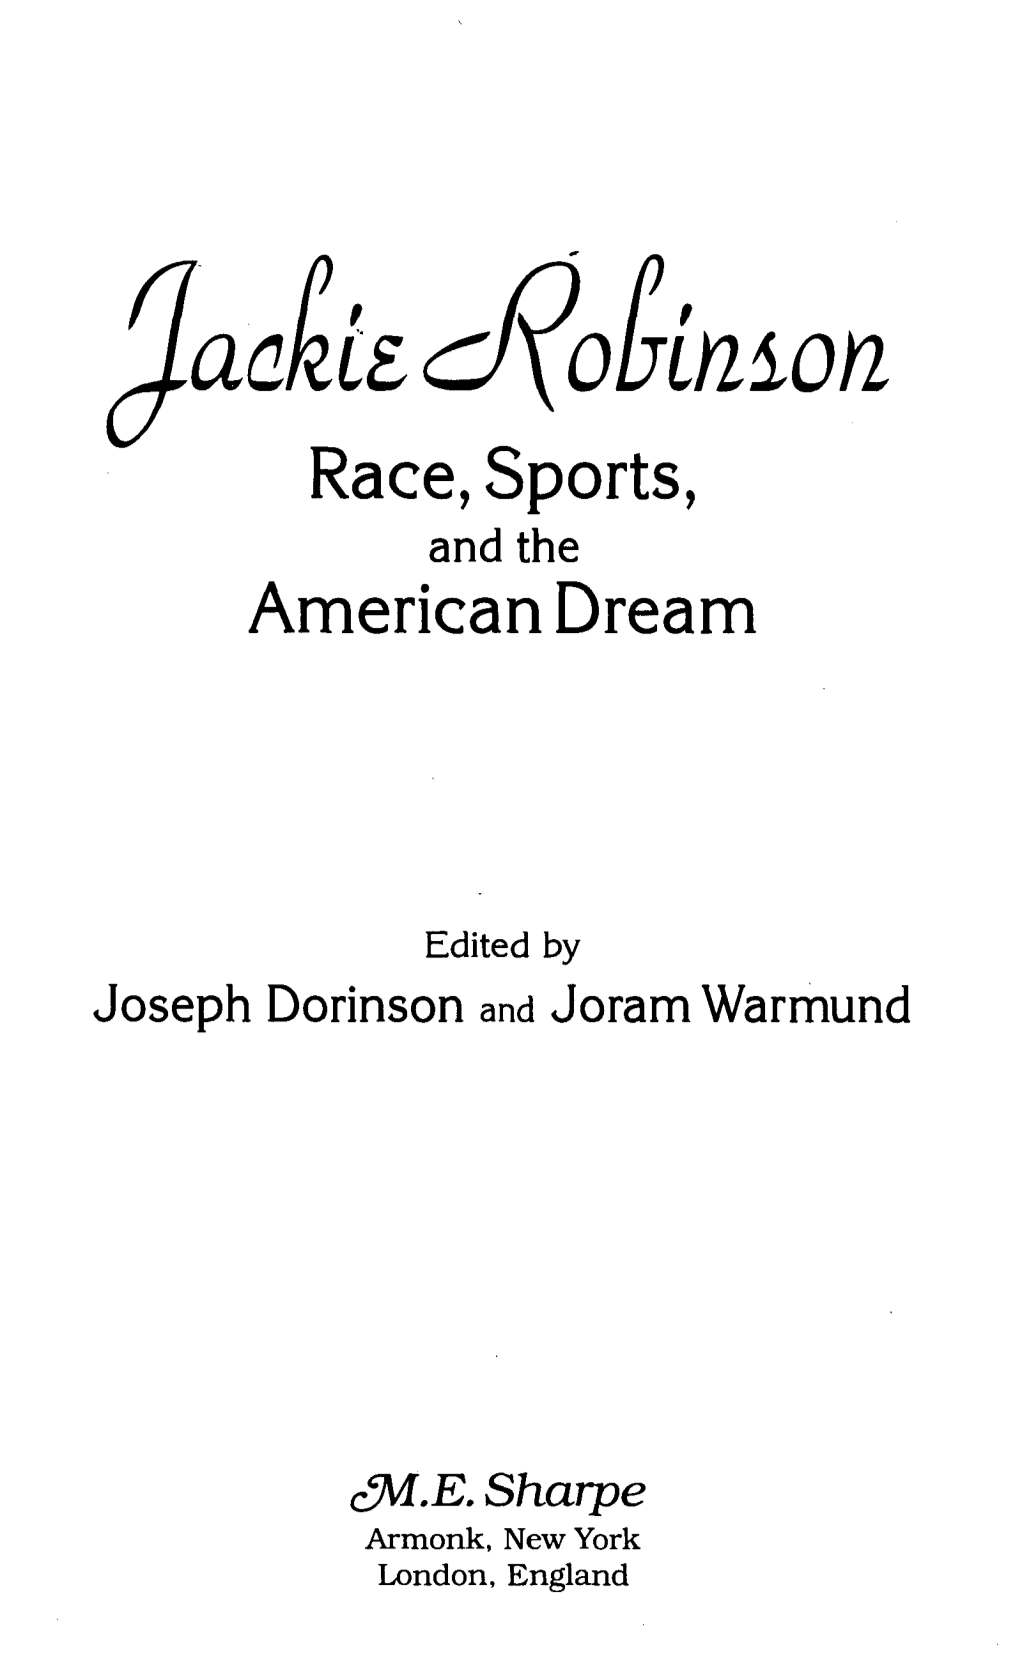 Kie, Cl\Ouiinion Race, Sports, and the American Dream